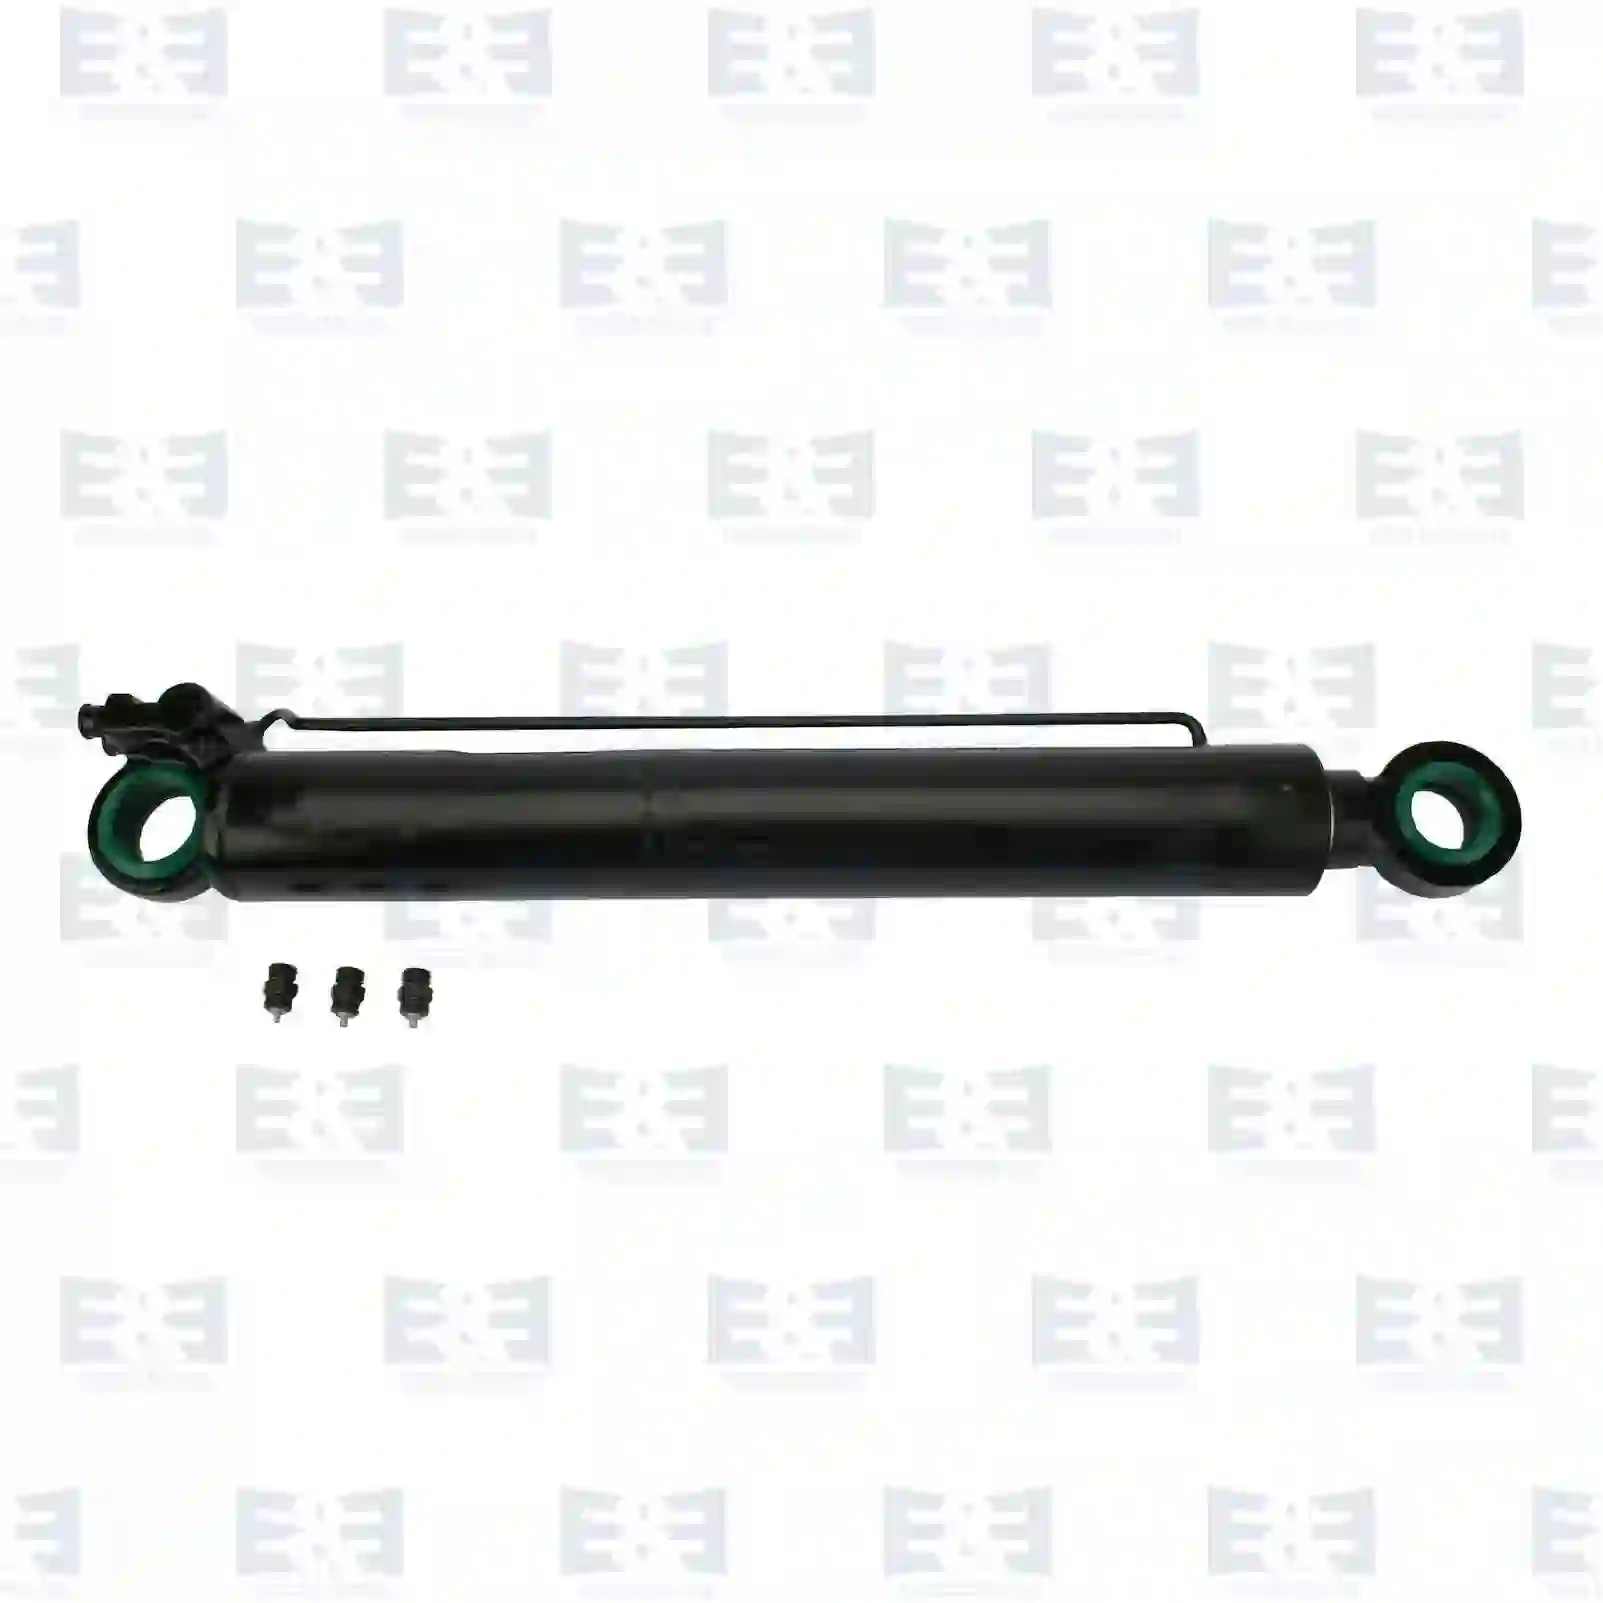 Cabin tilt cylinder, with 3 adapters, 2E2275361, 20922305, 3198843, ZG60350-0008, , , , , , ||  2E2275361 E&E Truck Spare Parts | Truck Spare Parts, Auotomotive Spare Parts Cabin tilt cylinder, with 3 adapters, 2E2275361, 20922305, 3198843, ZG60350-0008, , , , , , ||  2E2275361 E&E Truck Spare Parts | Truck Spare Parts, Auotomotive Spare Parts